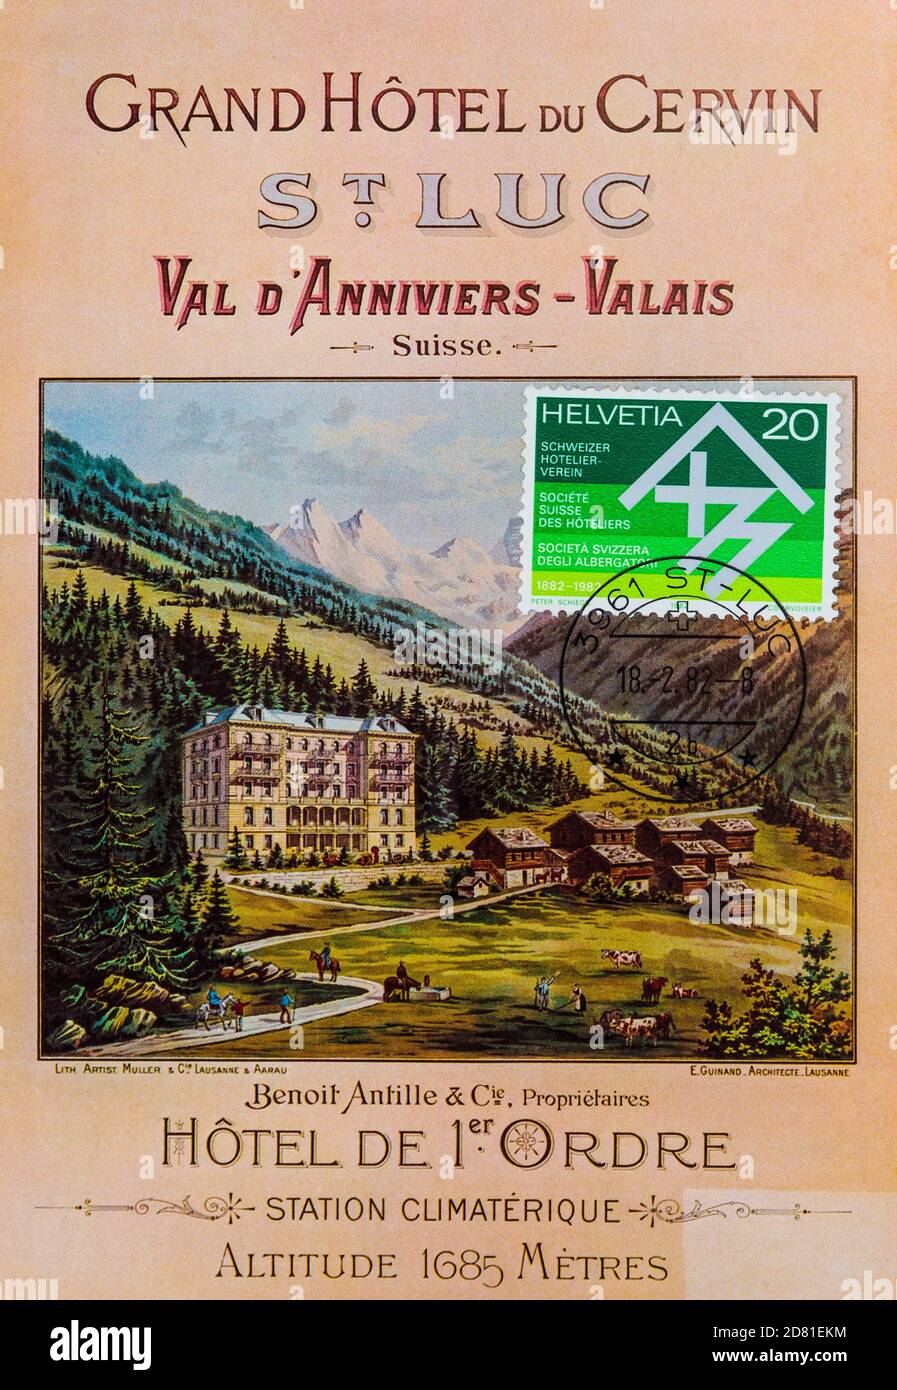 1982 mailed Swiss postcard illustrating a 1893 publicity poster for the Grand Hotel du Cervin St. Luc, Val d'Anniviers, Valais, Switzerland. Stock Photo